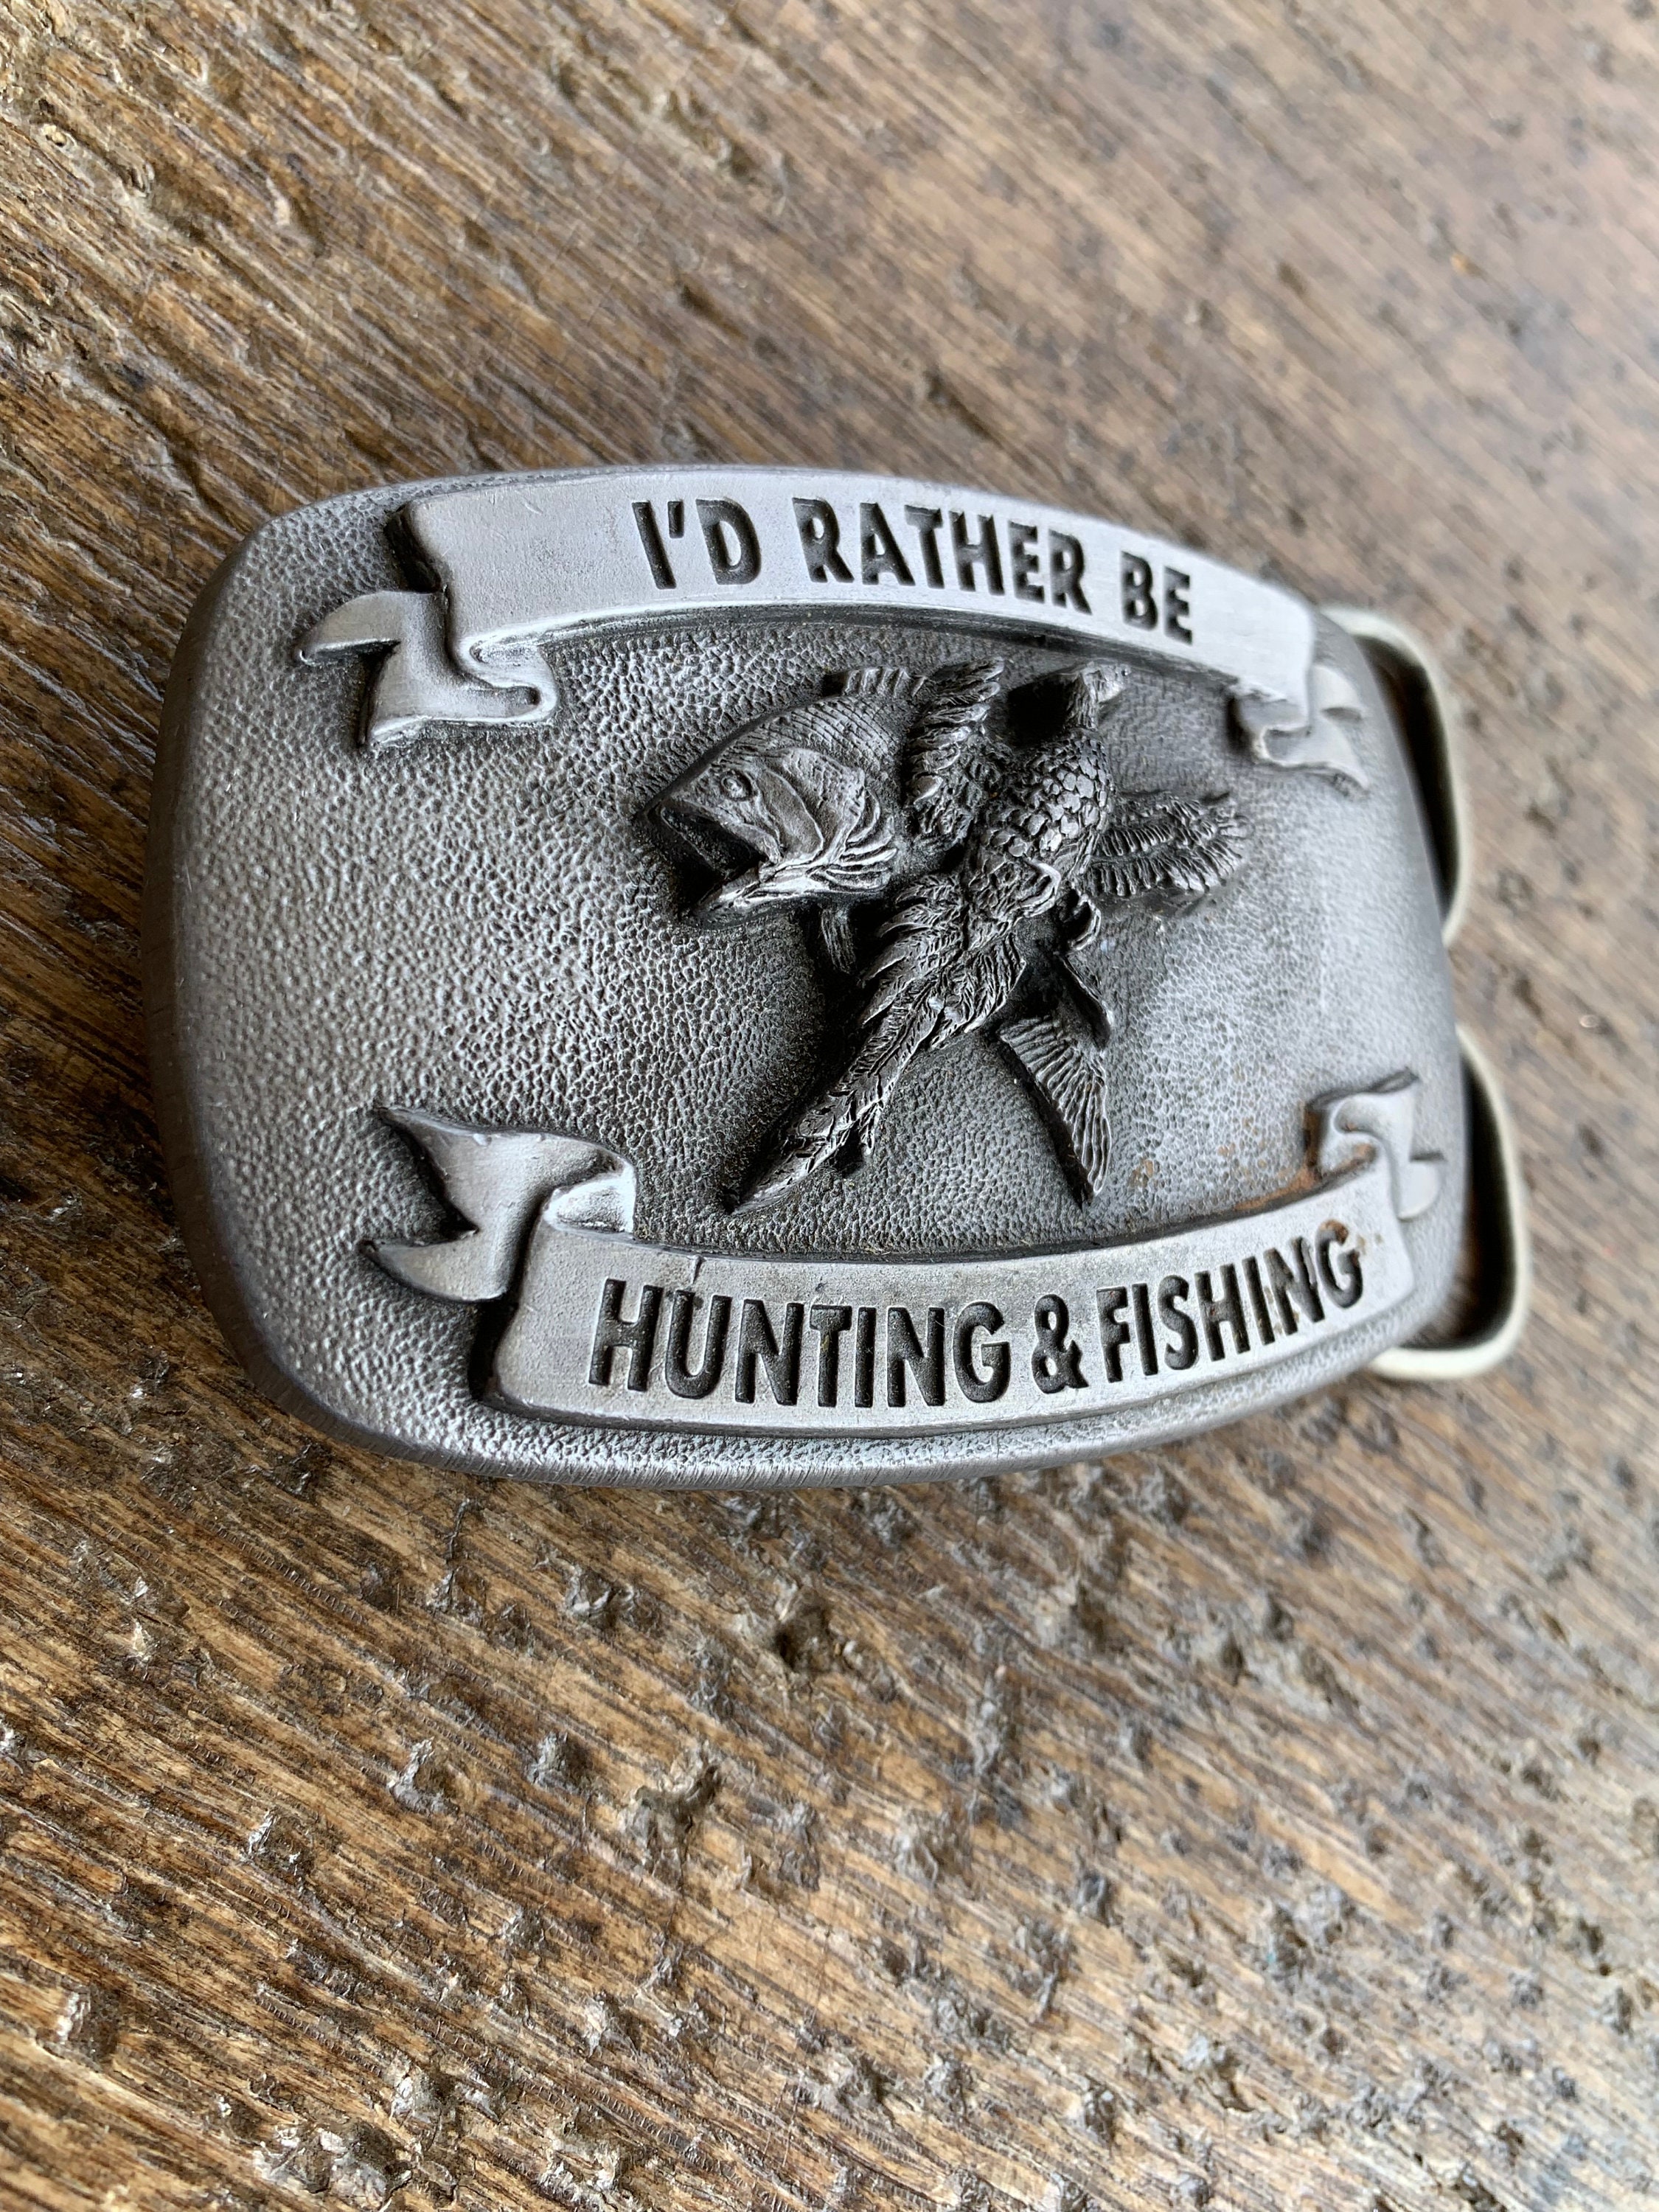 jeanniesjewels1 Vintage I'd Rather Be Hunting & Fishing Fish and Game Bird Raised Design Oval Pewter Colored Belt Buckle